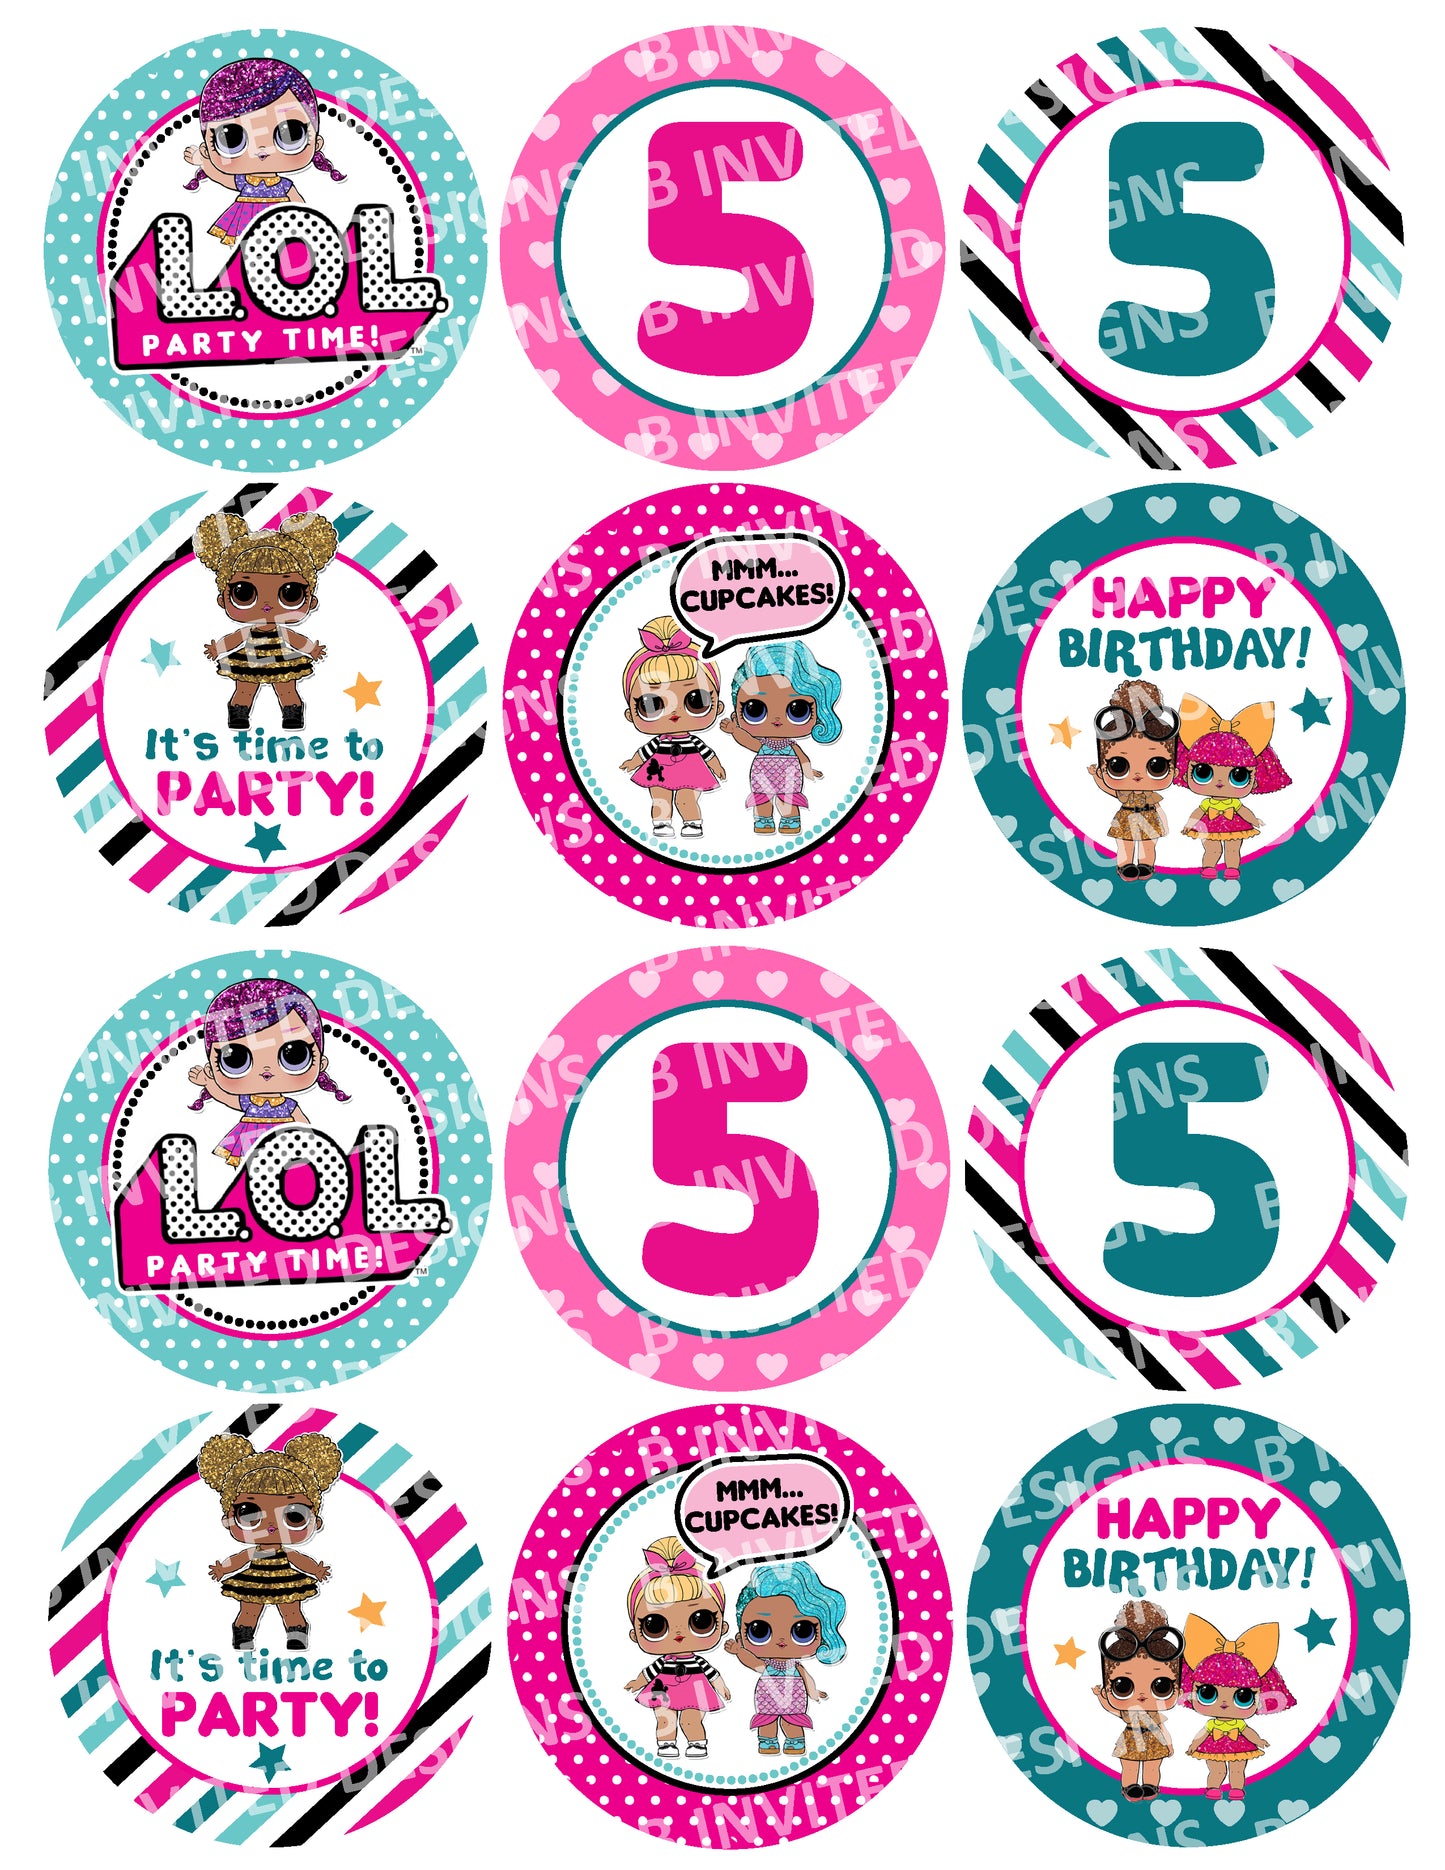 LOL DOLLS Awesome Cupcake Toppers! 2 Inch or 2.5 Inch! Digital OR Printed & Fully Assembled!